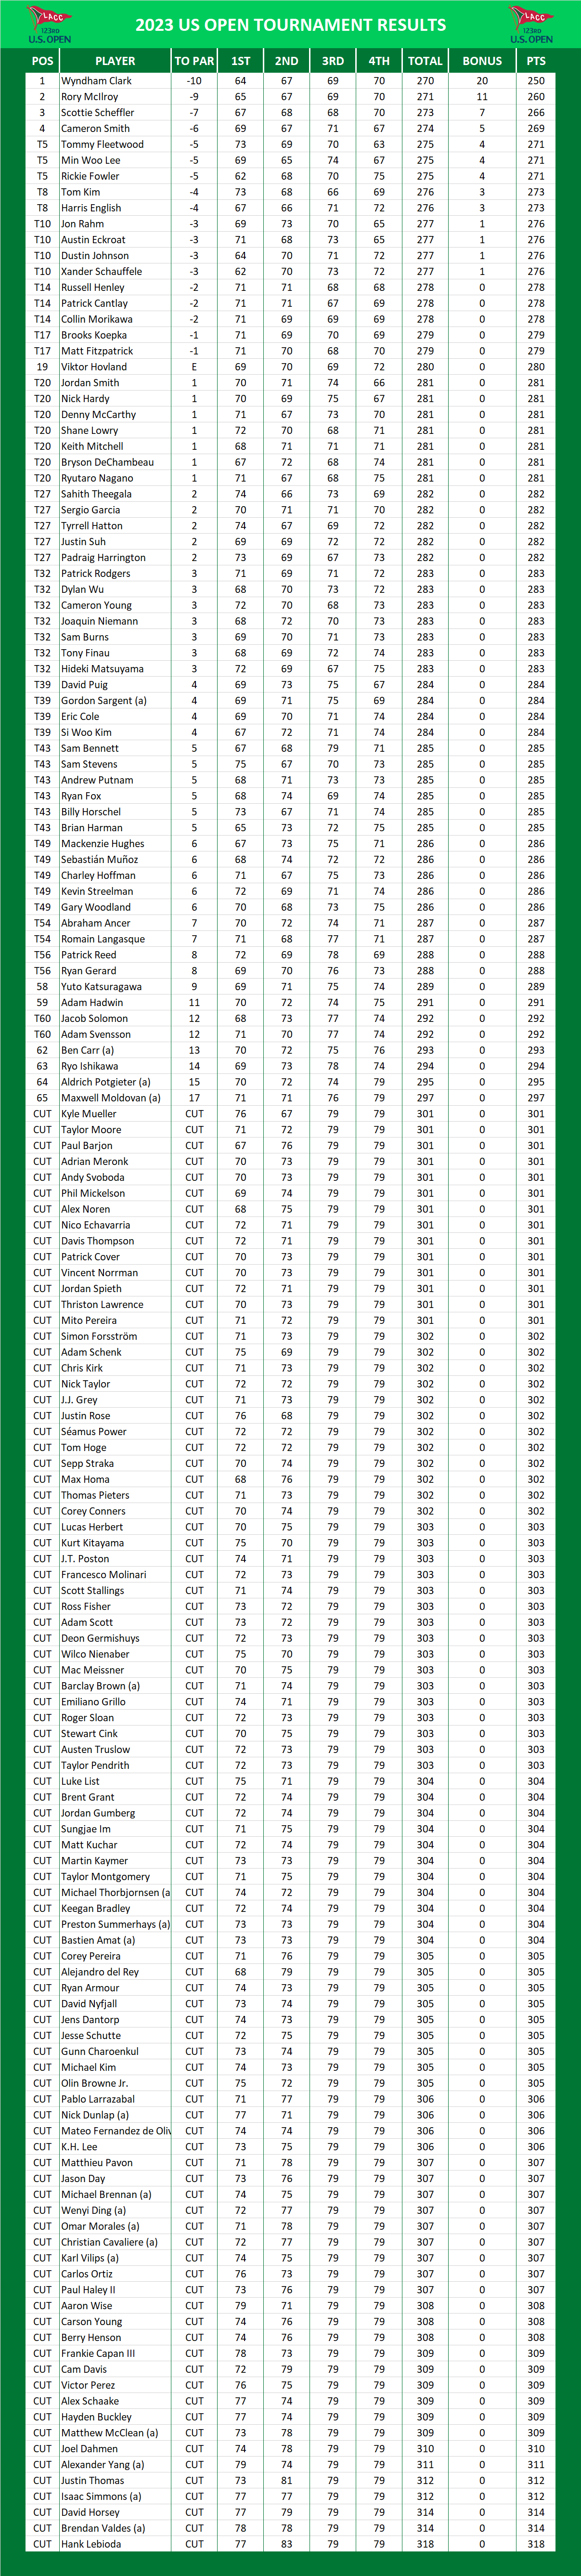 2023 US Open PGA Results